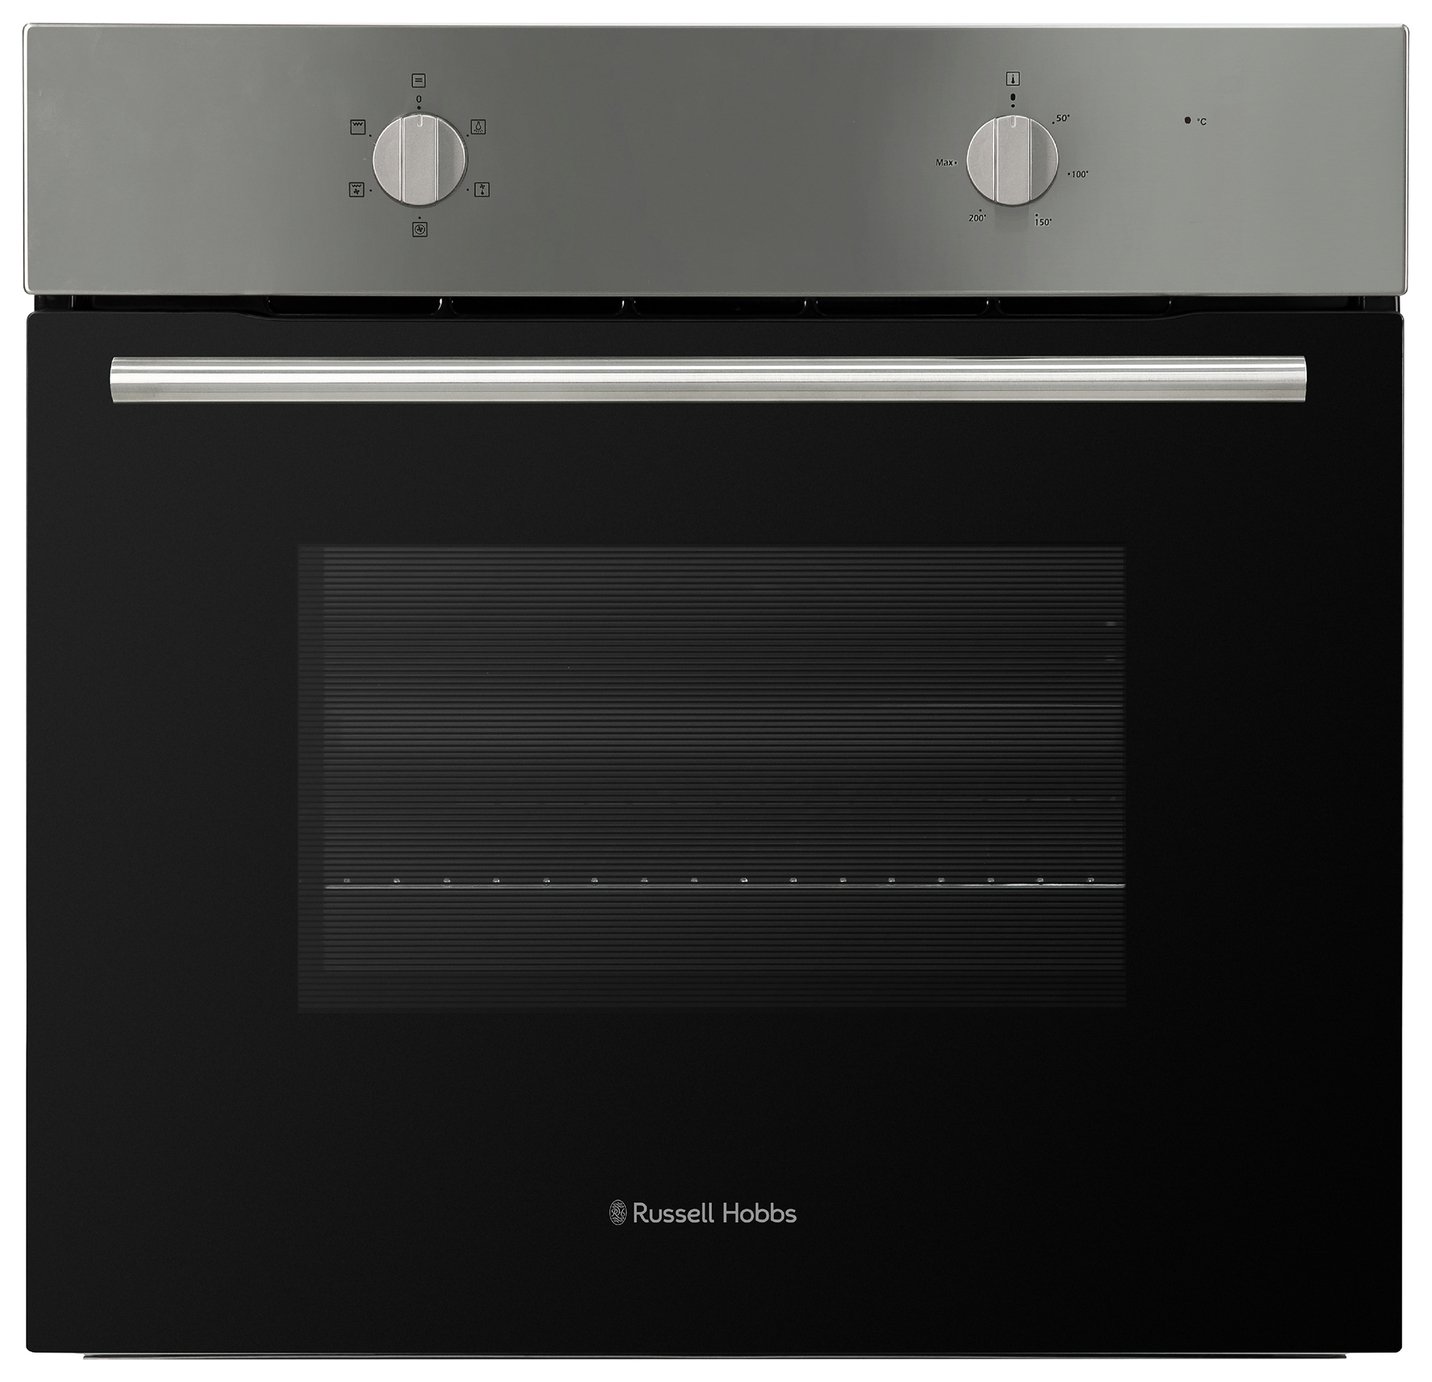 Russell Hobbs RHFEO7004SS Built In Single Electric Oven